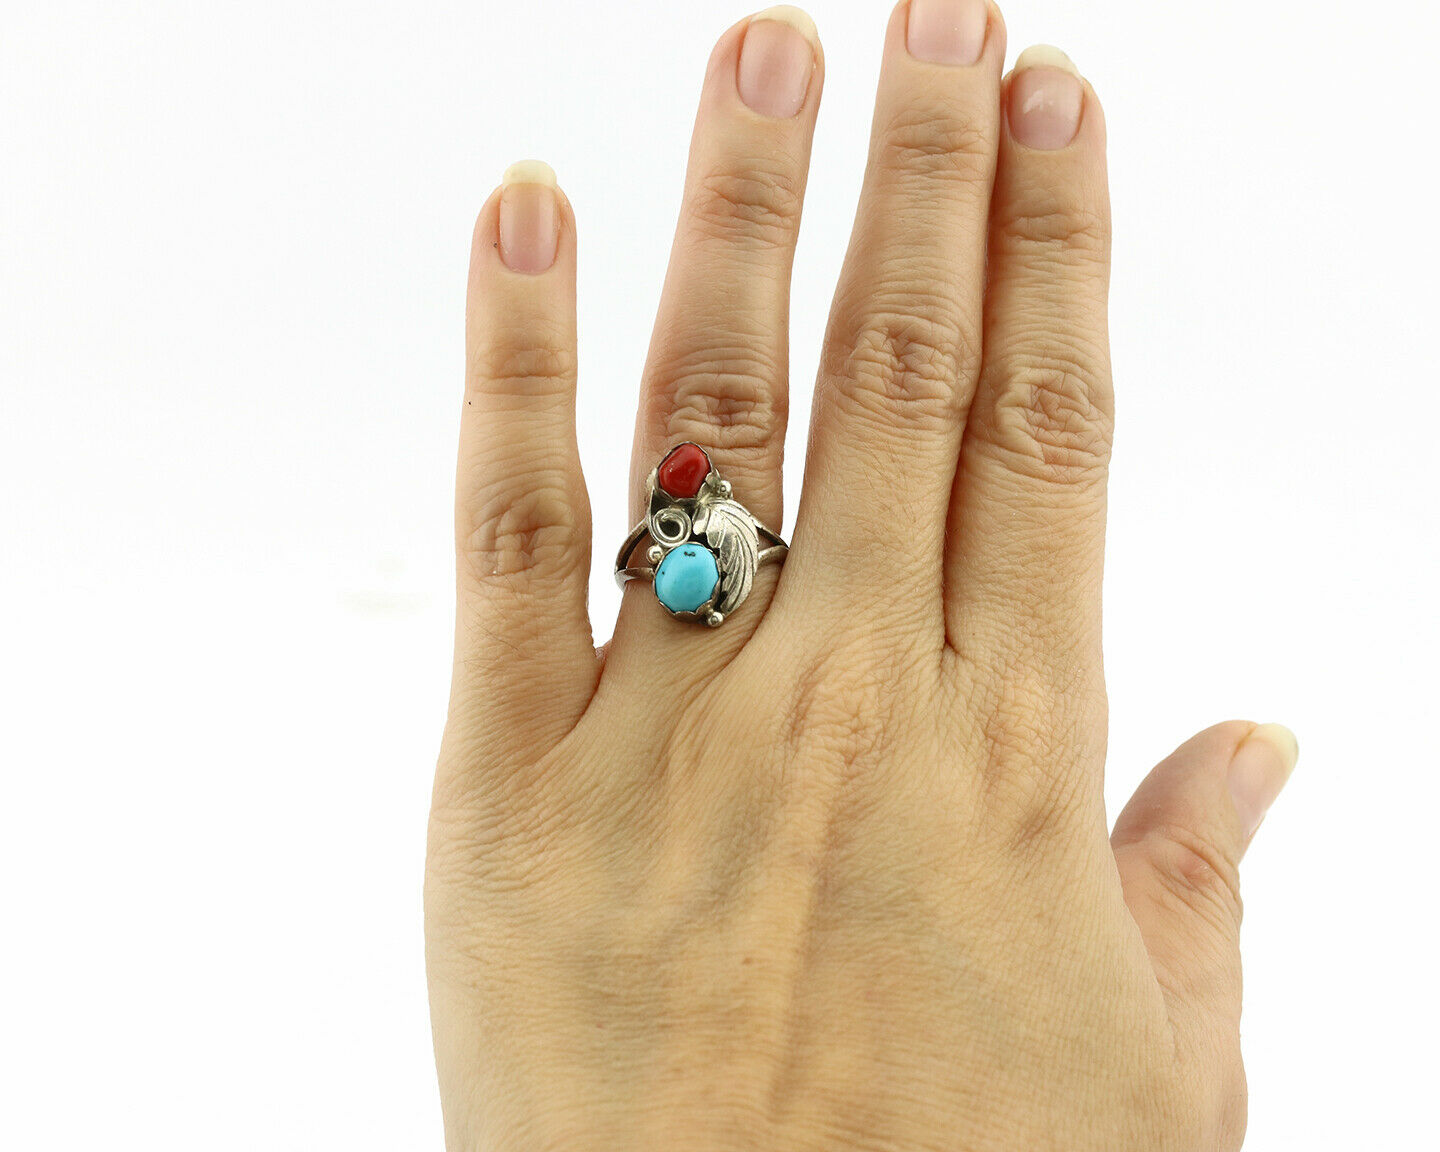 Navajo Ring .925 Silver Turquoise & Coral Native American Artist C.1980's